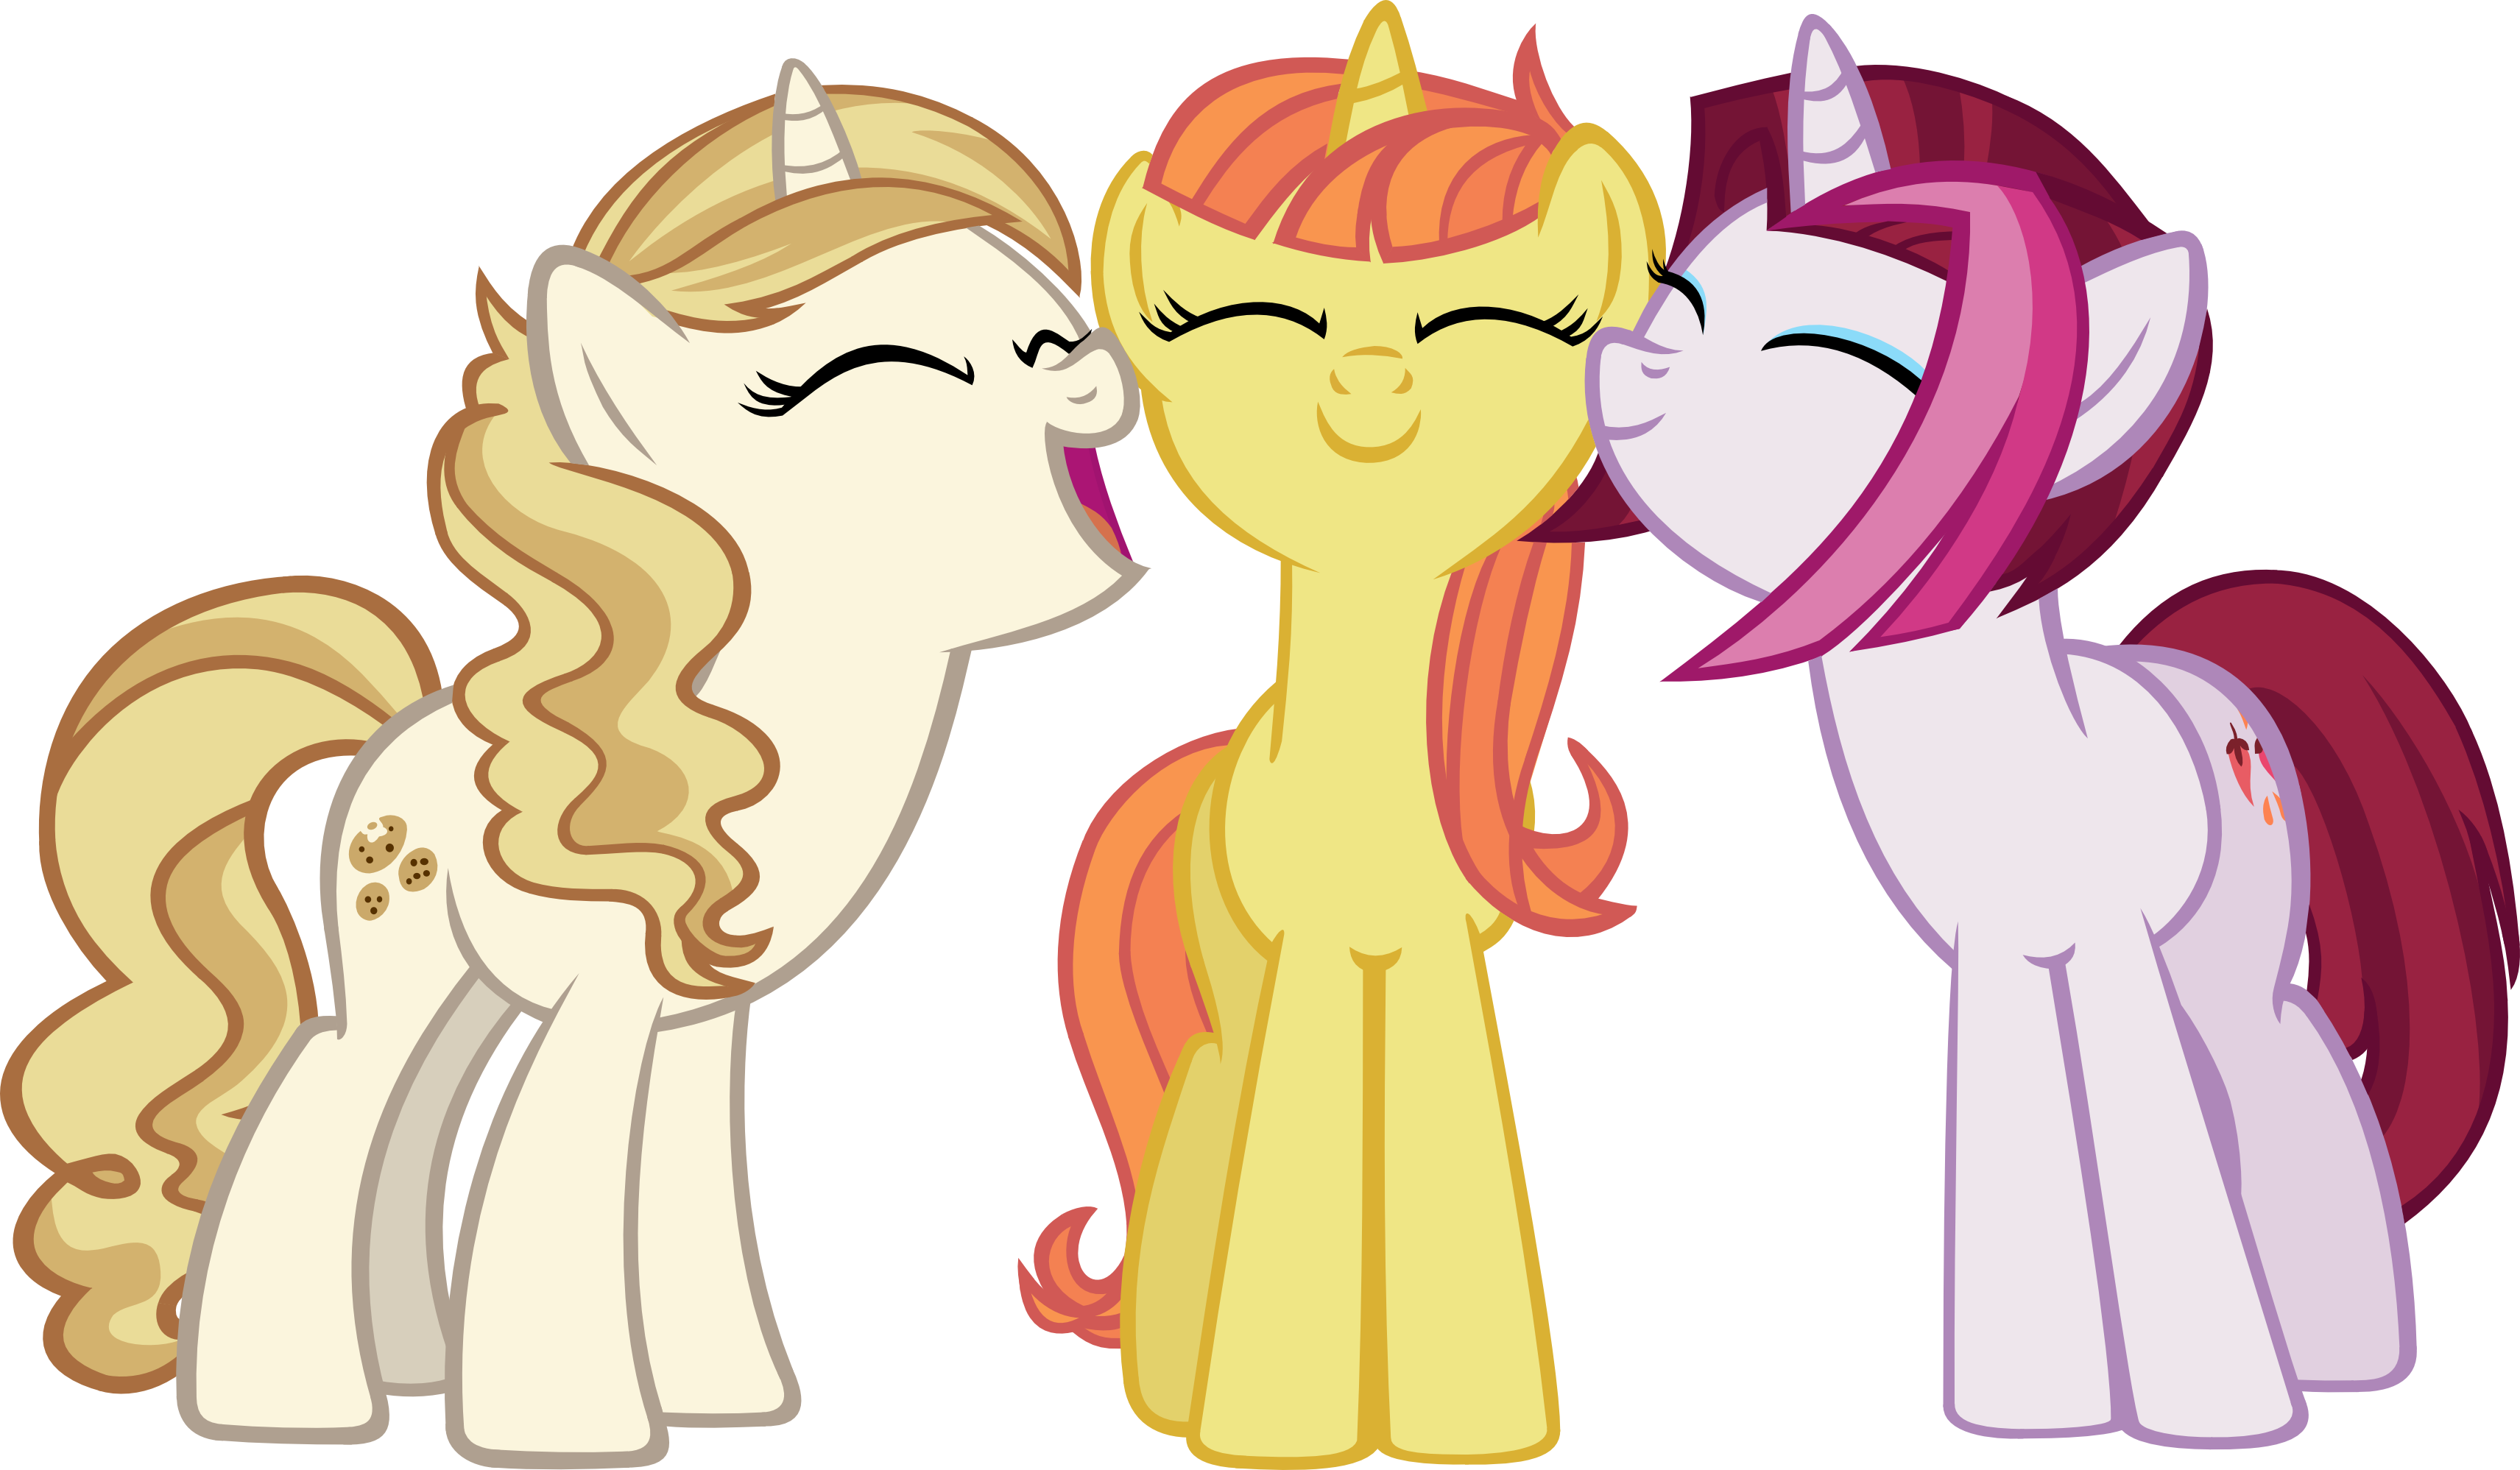 nuzzling_friends_by_ironm17-daw6ulj.png